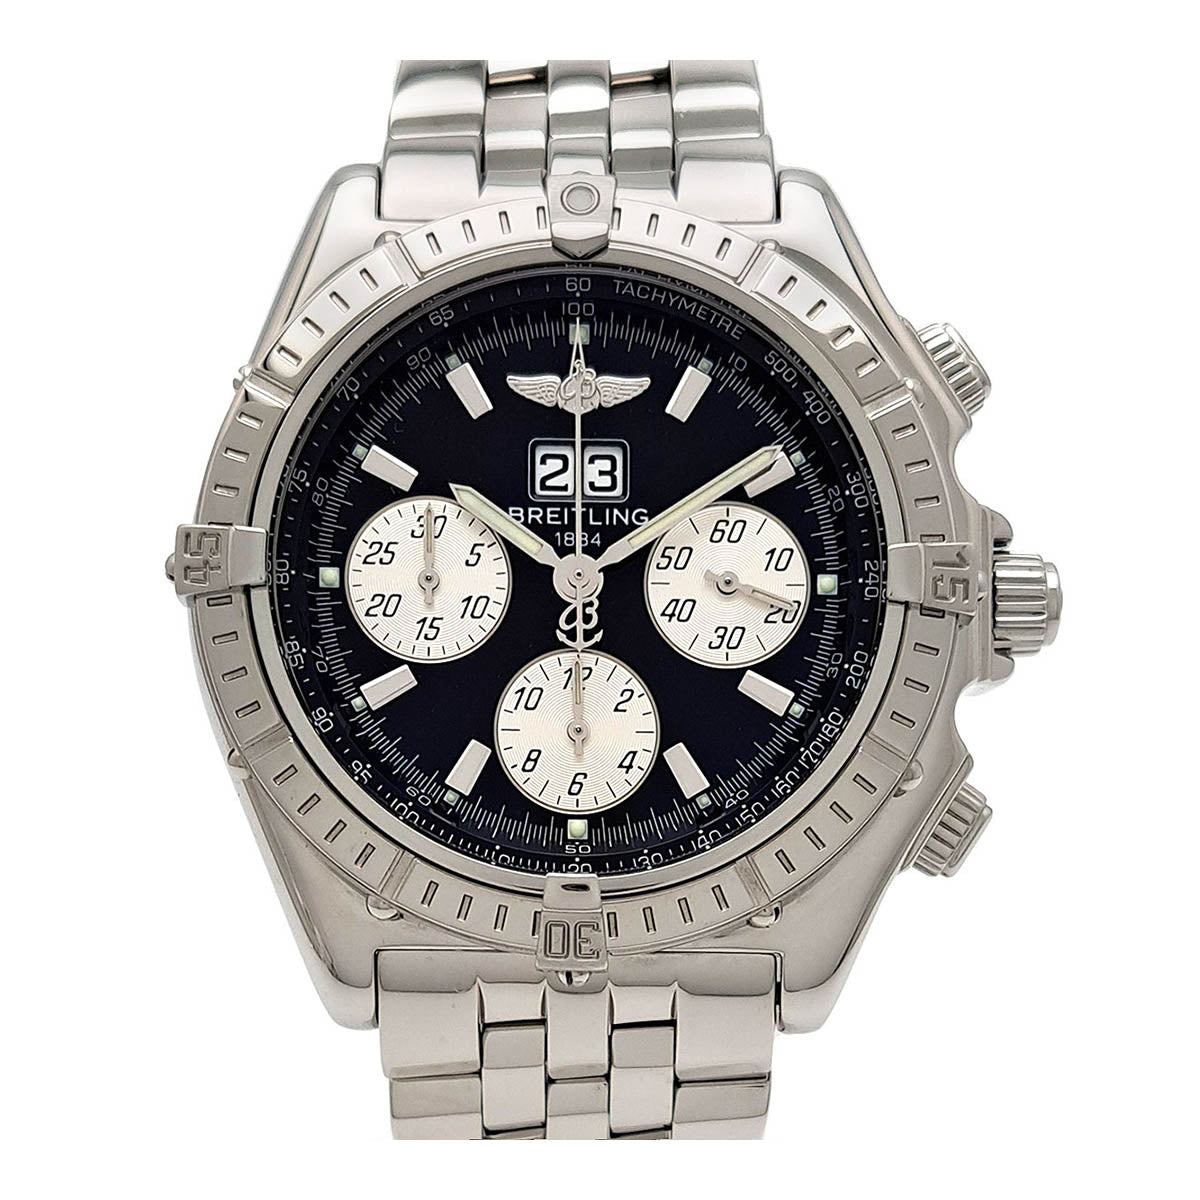 Breitling Crosswind Special A44355 Automatic Watch, Stainless Steel, Men's (Pre-owned) A44355